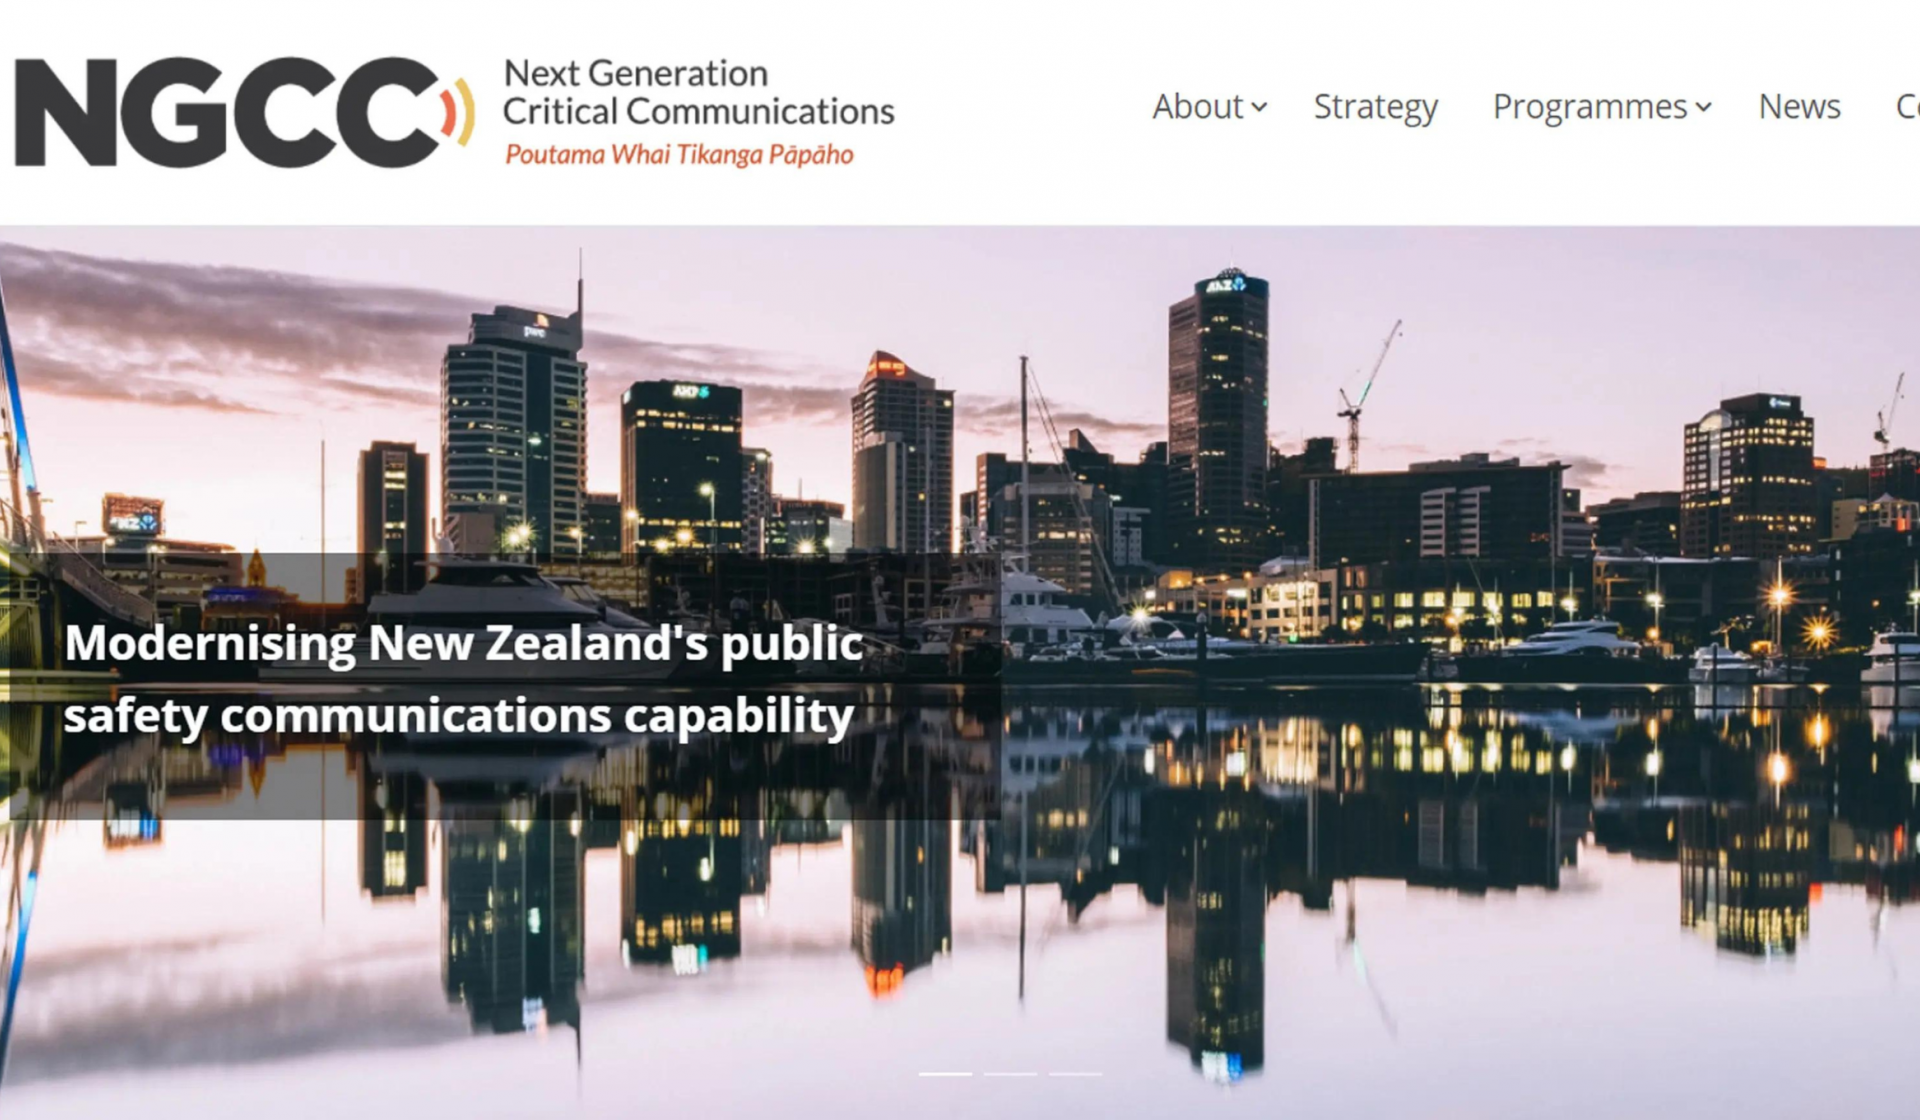 Screenshot of the NGCC website homepage Modernising New Zealands public safety communications capability 